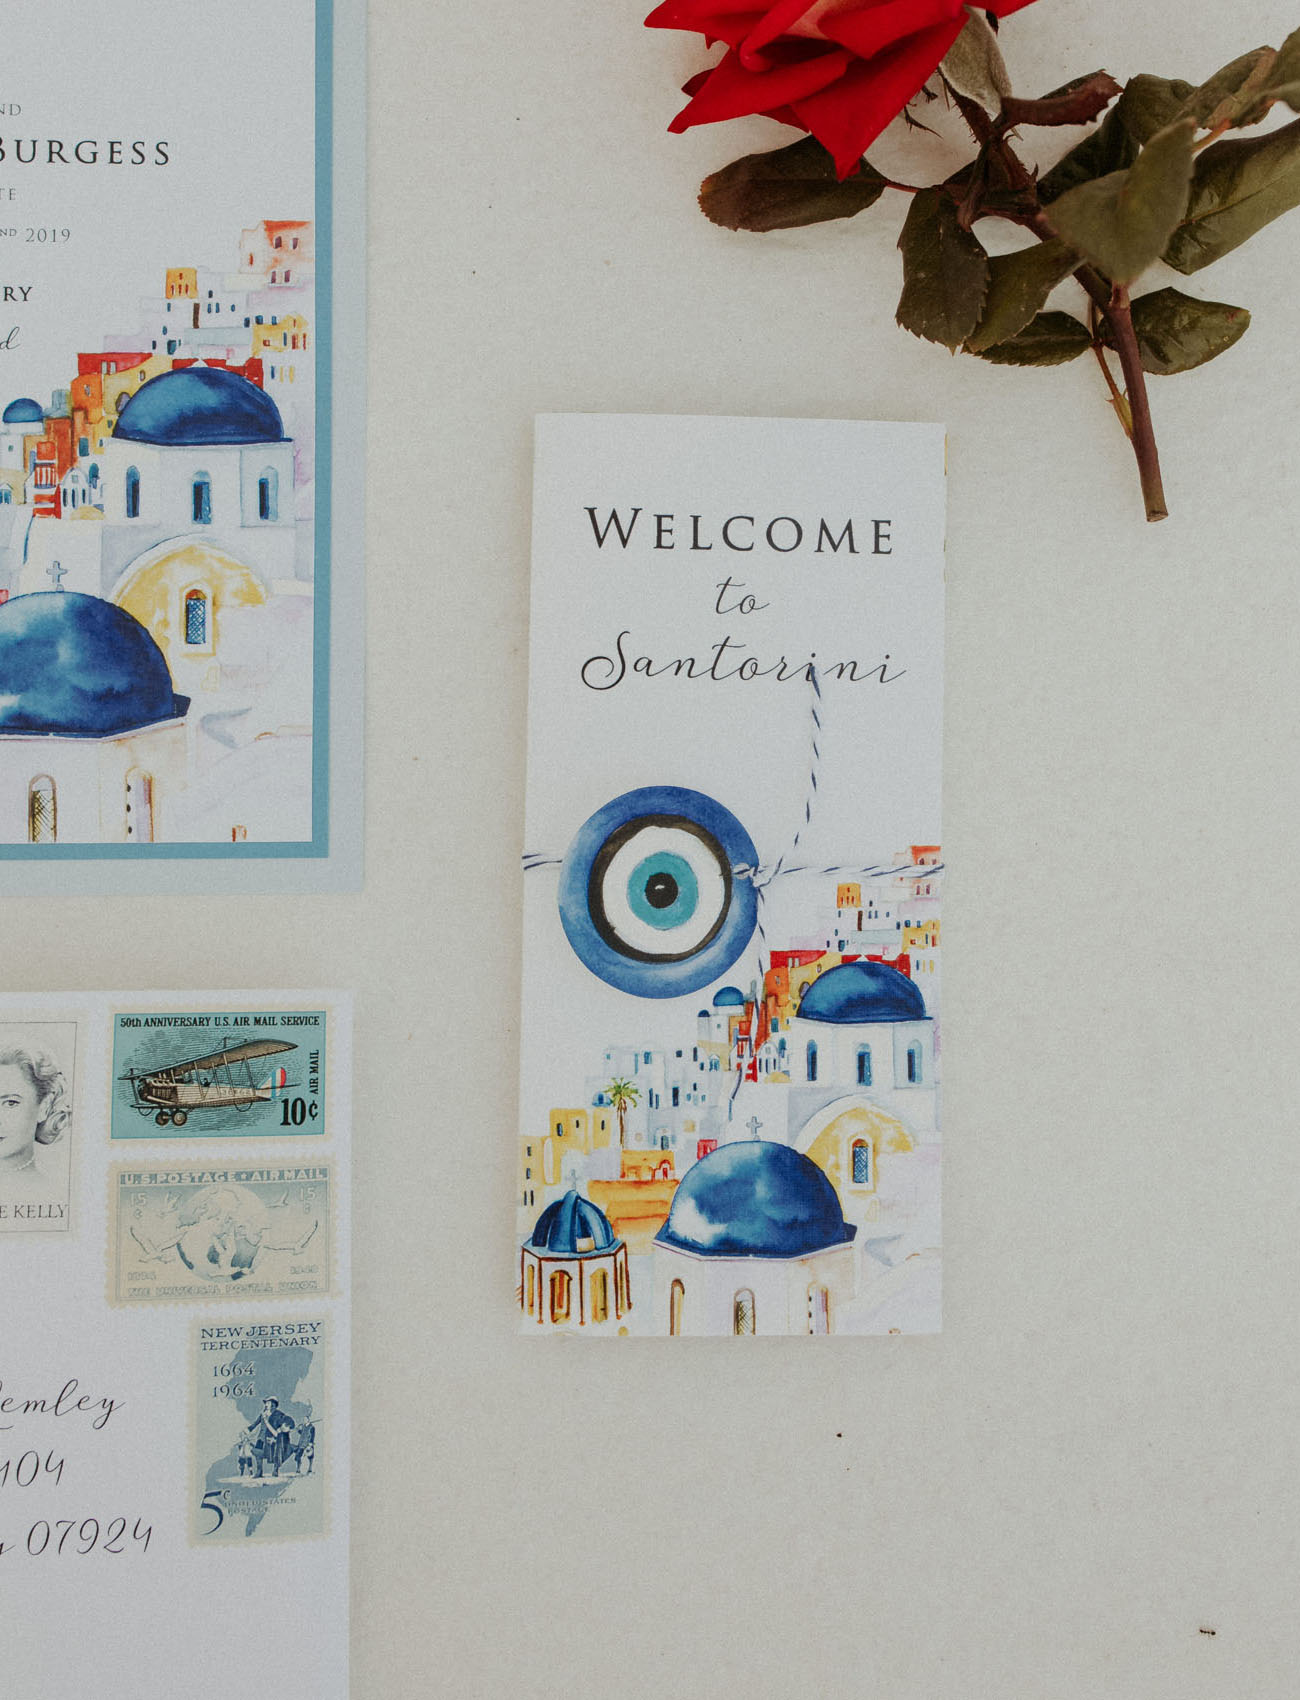 The wedding stationery was strongly inspired by Santorini, done in bright colors and with watercolors